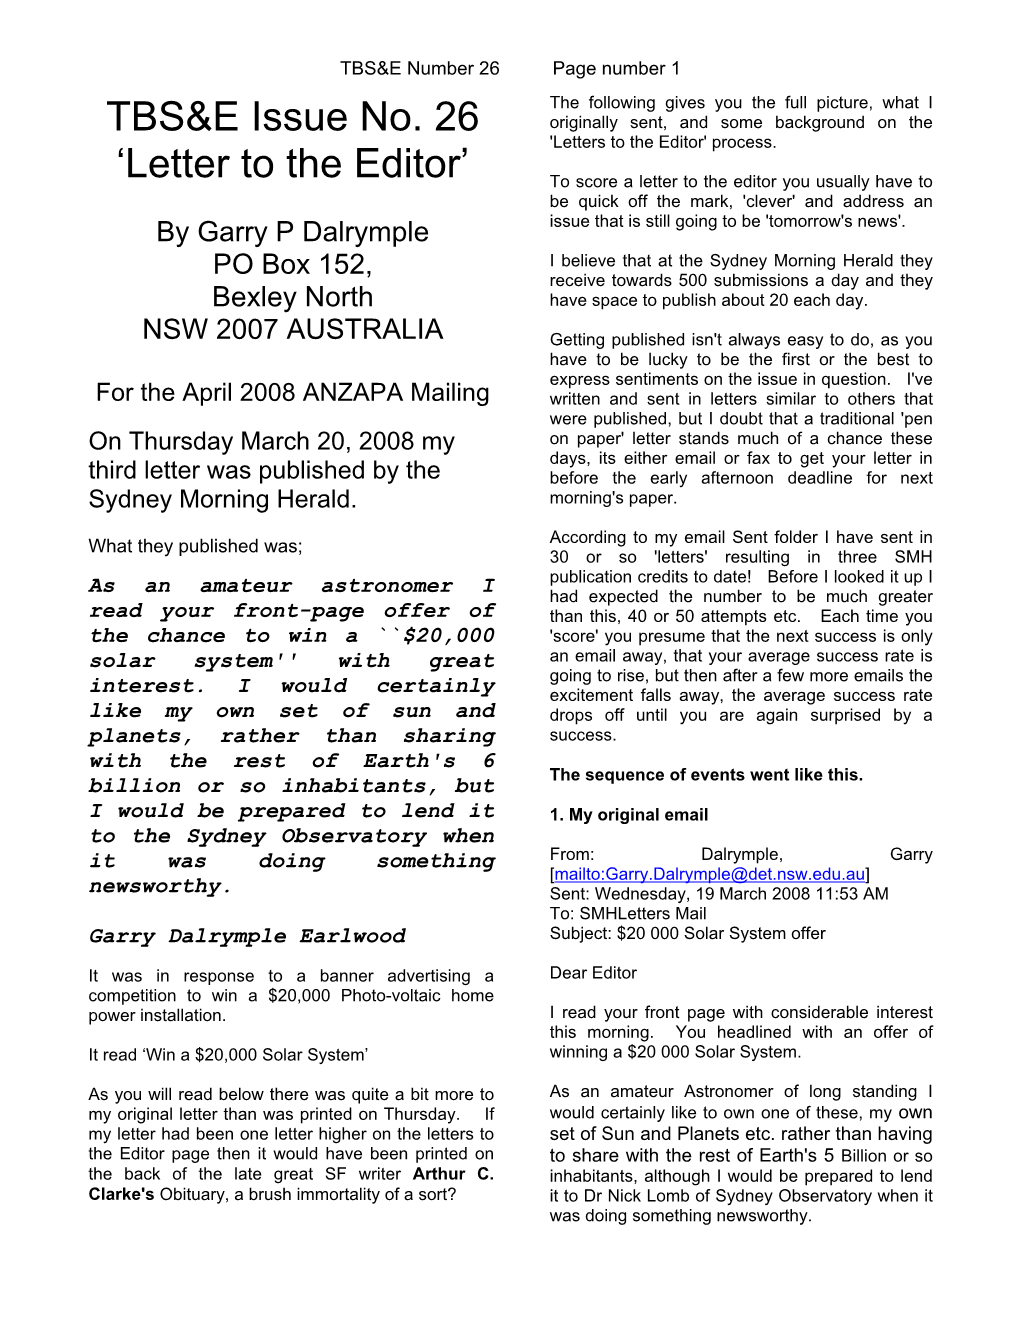 TBS&E Issue No. 26 'Letter to the Editor'